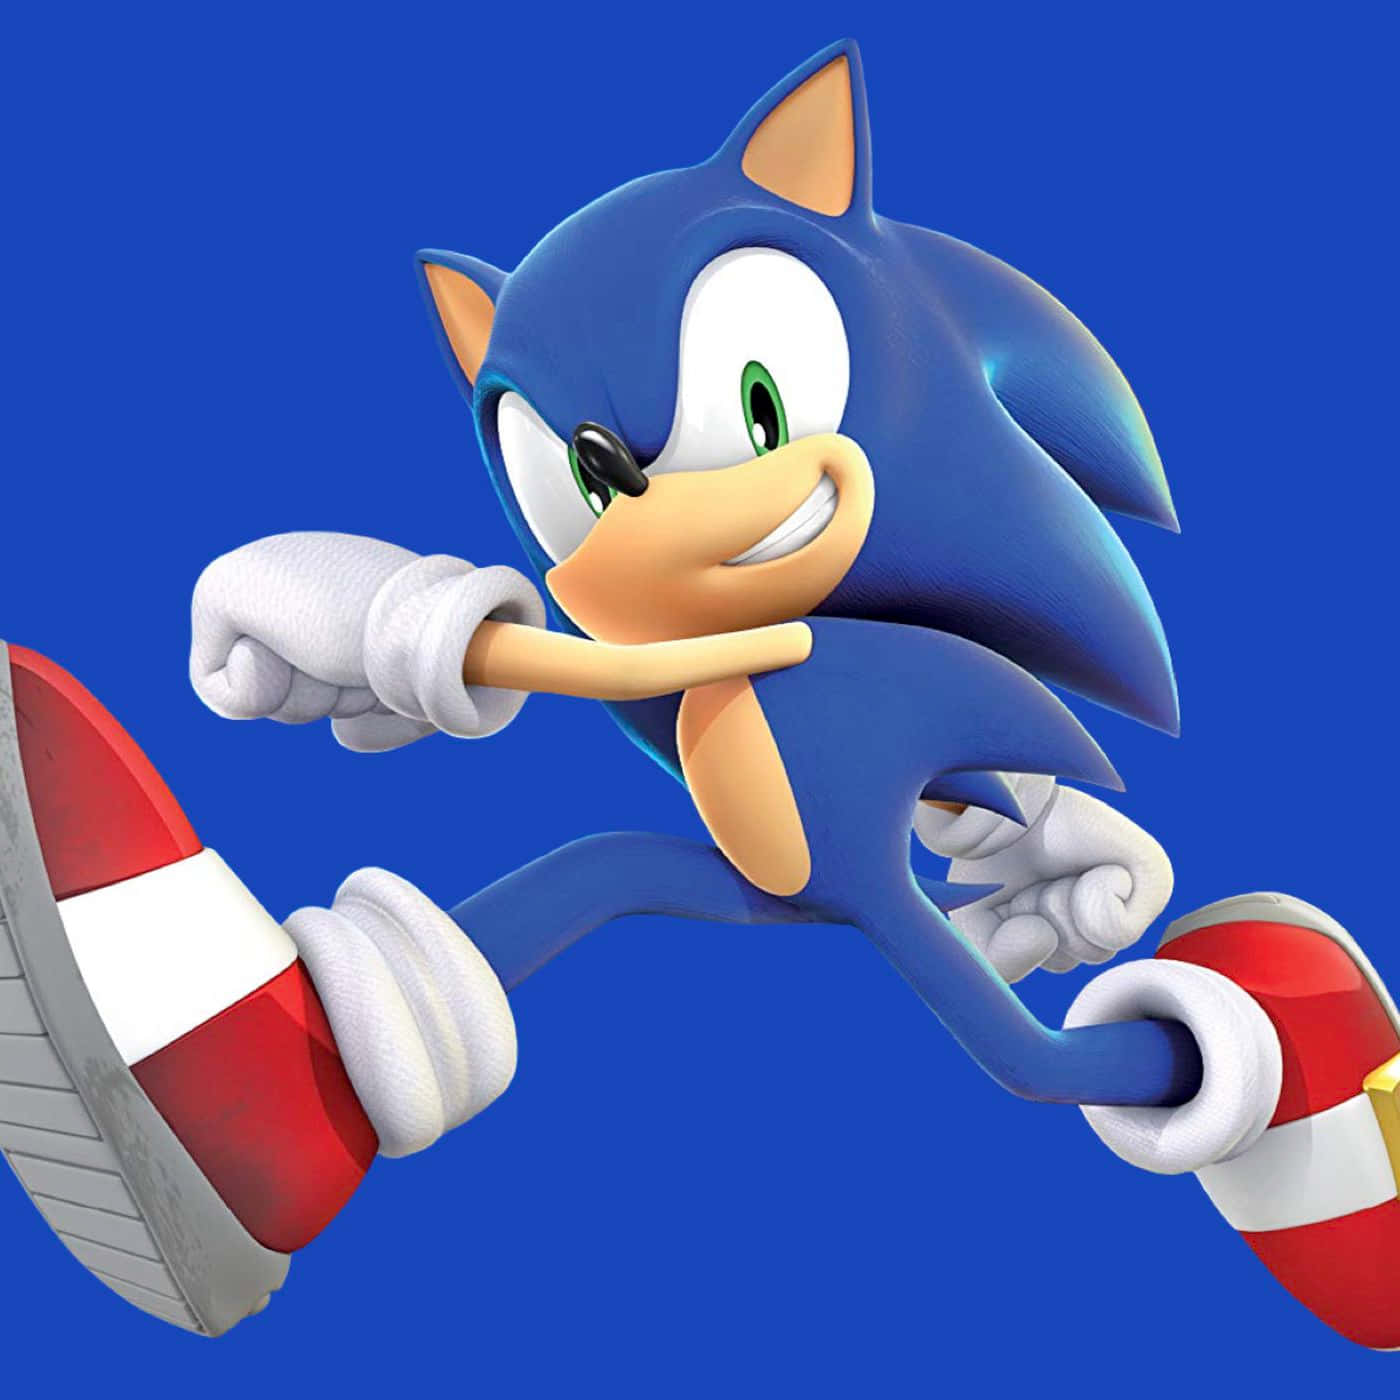 Download Sonic The Hedgehog running through Sonic World | Wallpapers.com